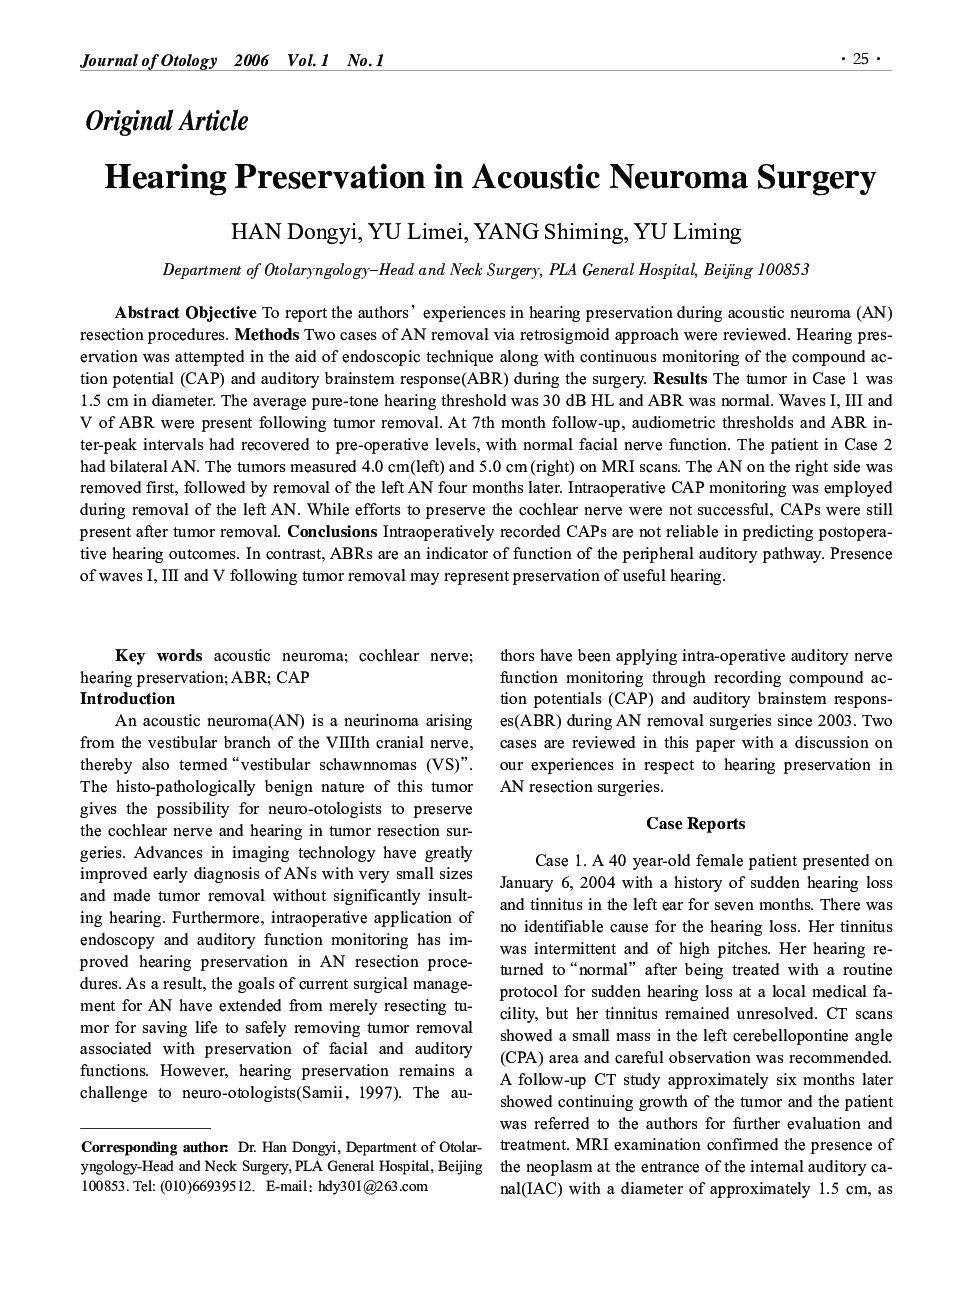 Hearing Preservation in Acoustic Neuroma Surgery